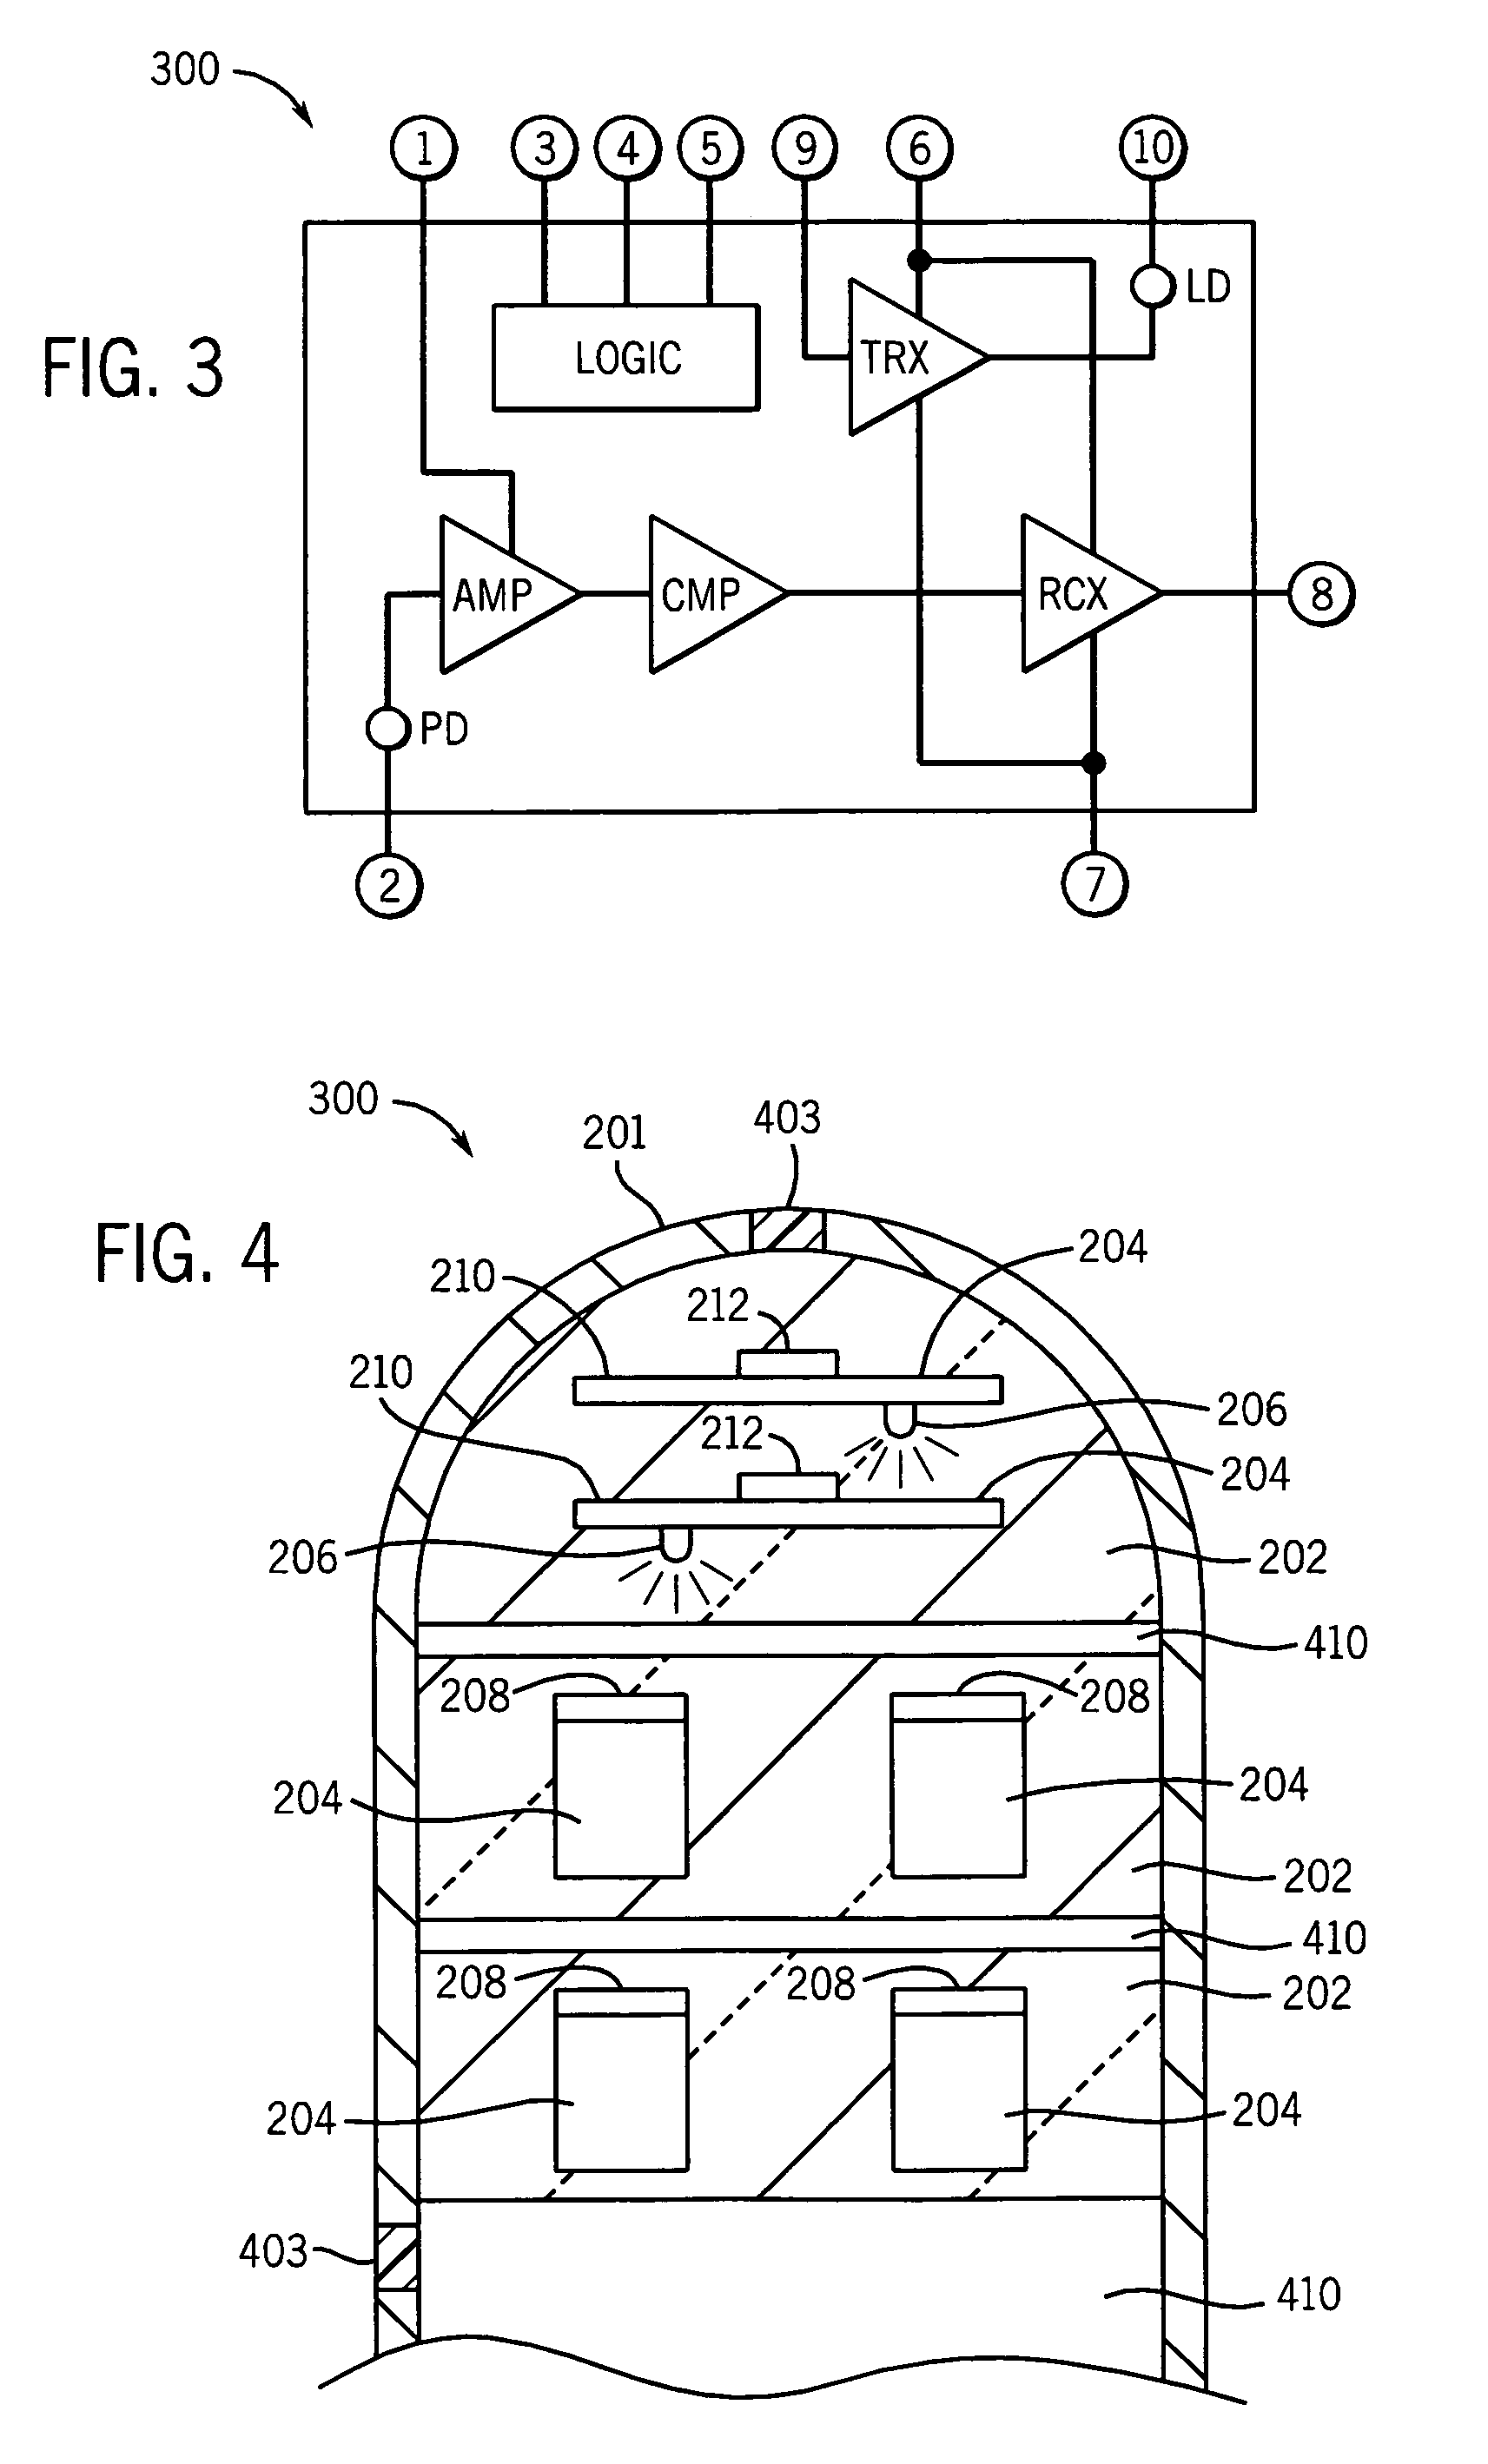 Projectile having a casing and/or interior acting as a communication bus between electronic components